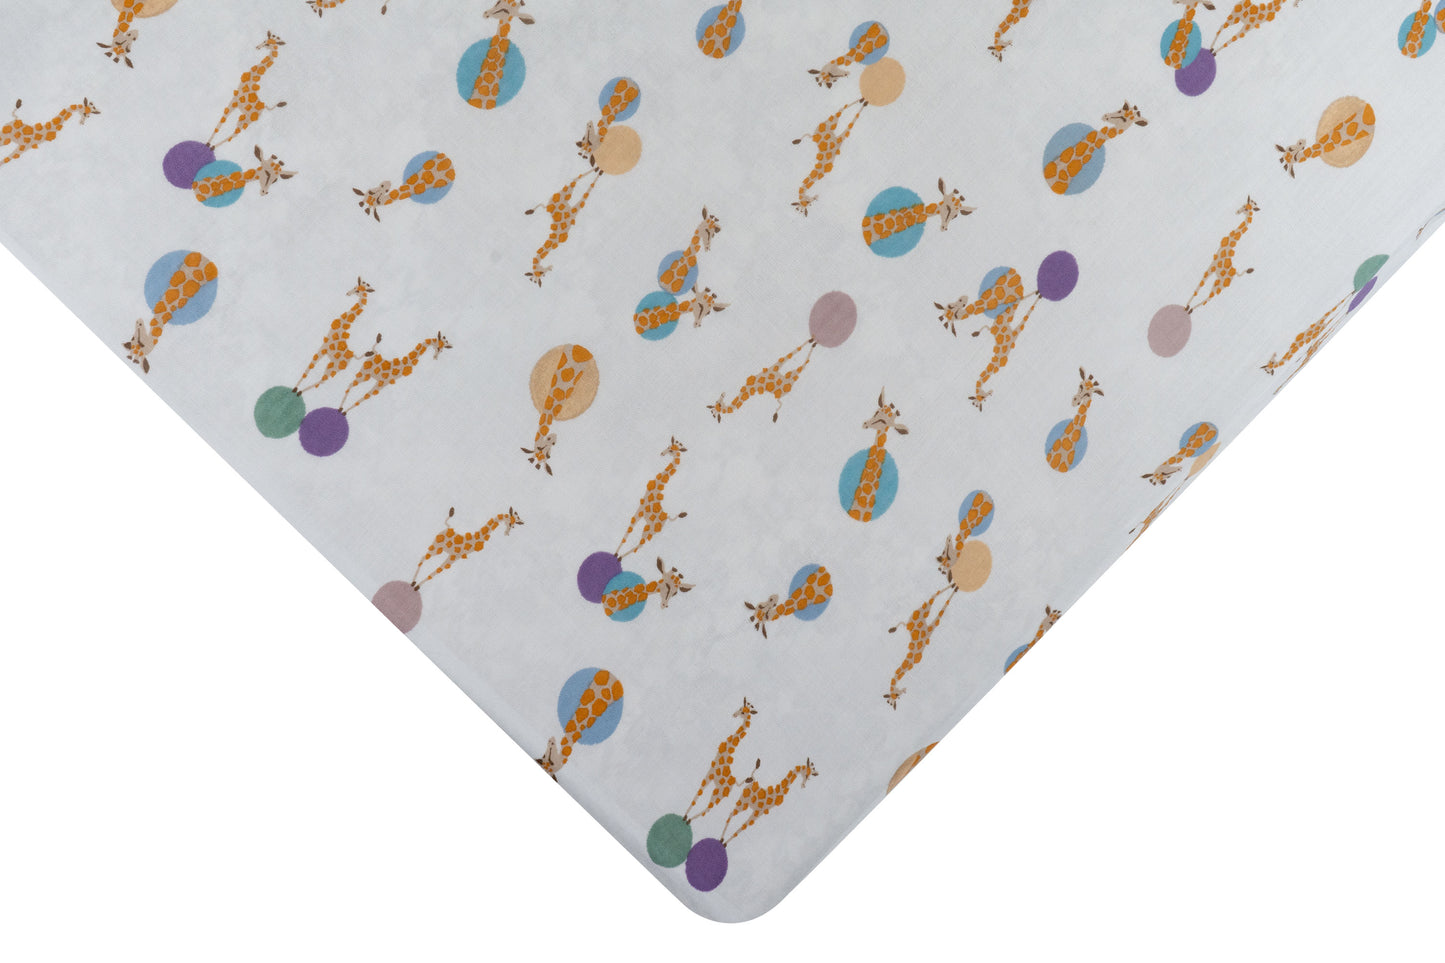 Load image into Gallery viewer, Fitted Crib Sheet (Bamboo) - Giraffe Shapes
